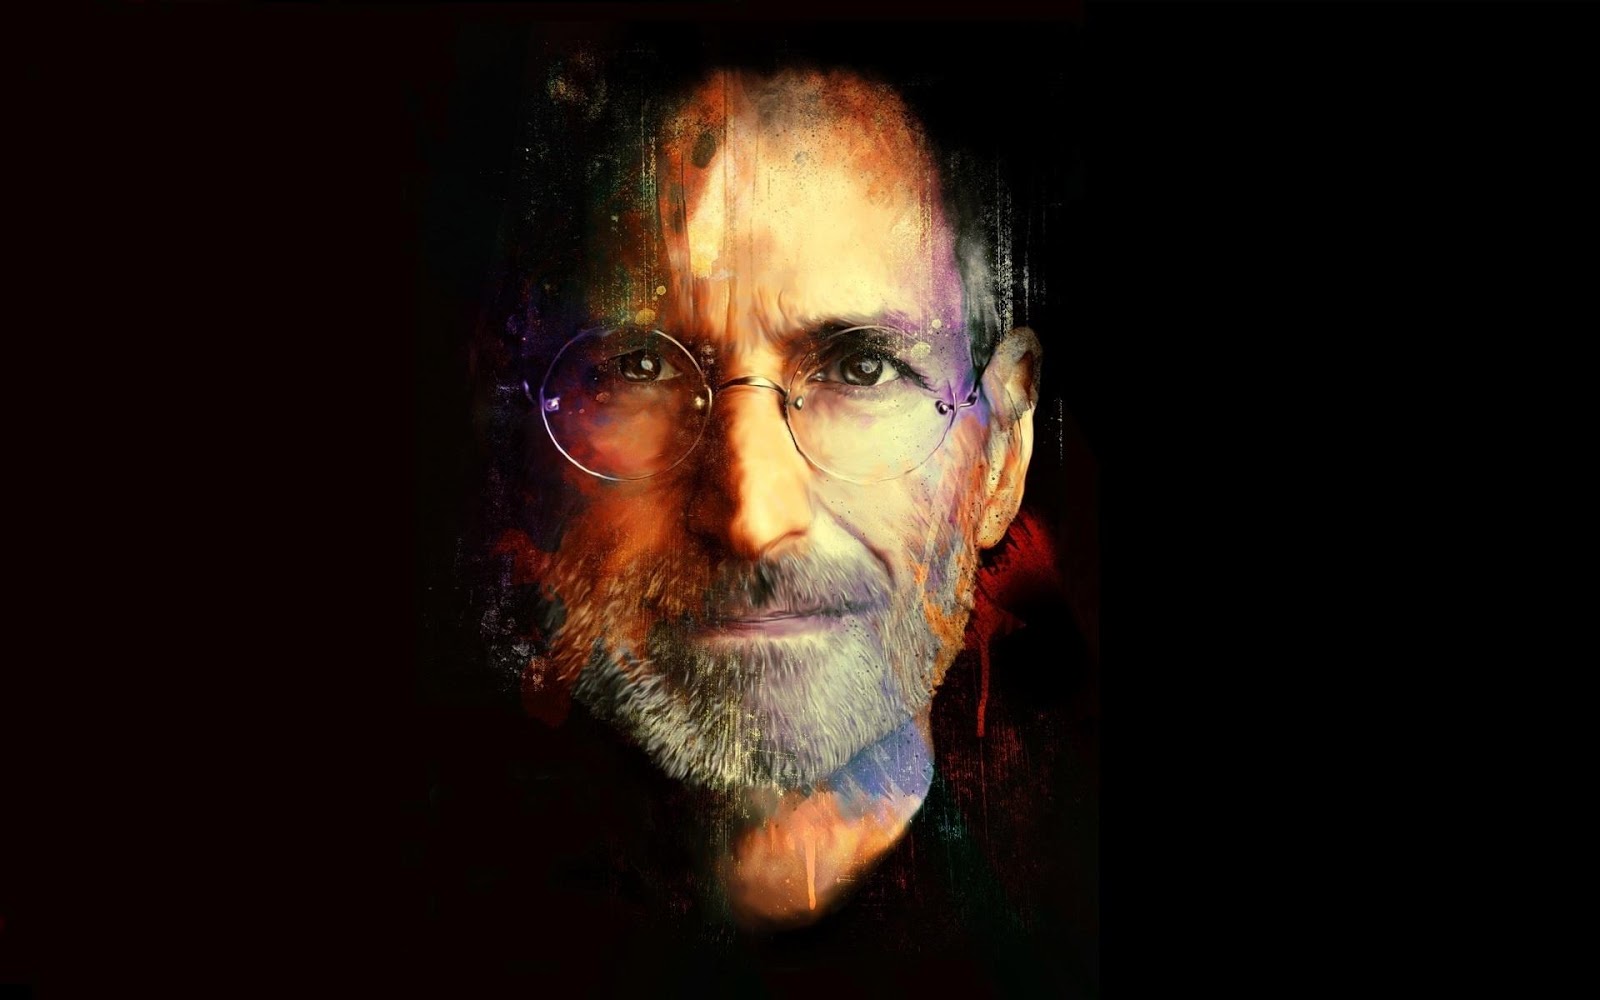 2012 Mr Steve Jobs Tribute photo picture Wallpapers | Top Model Dress ...